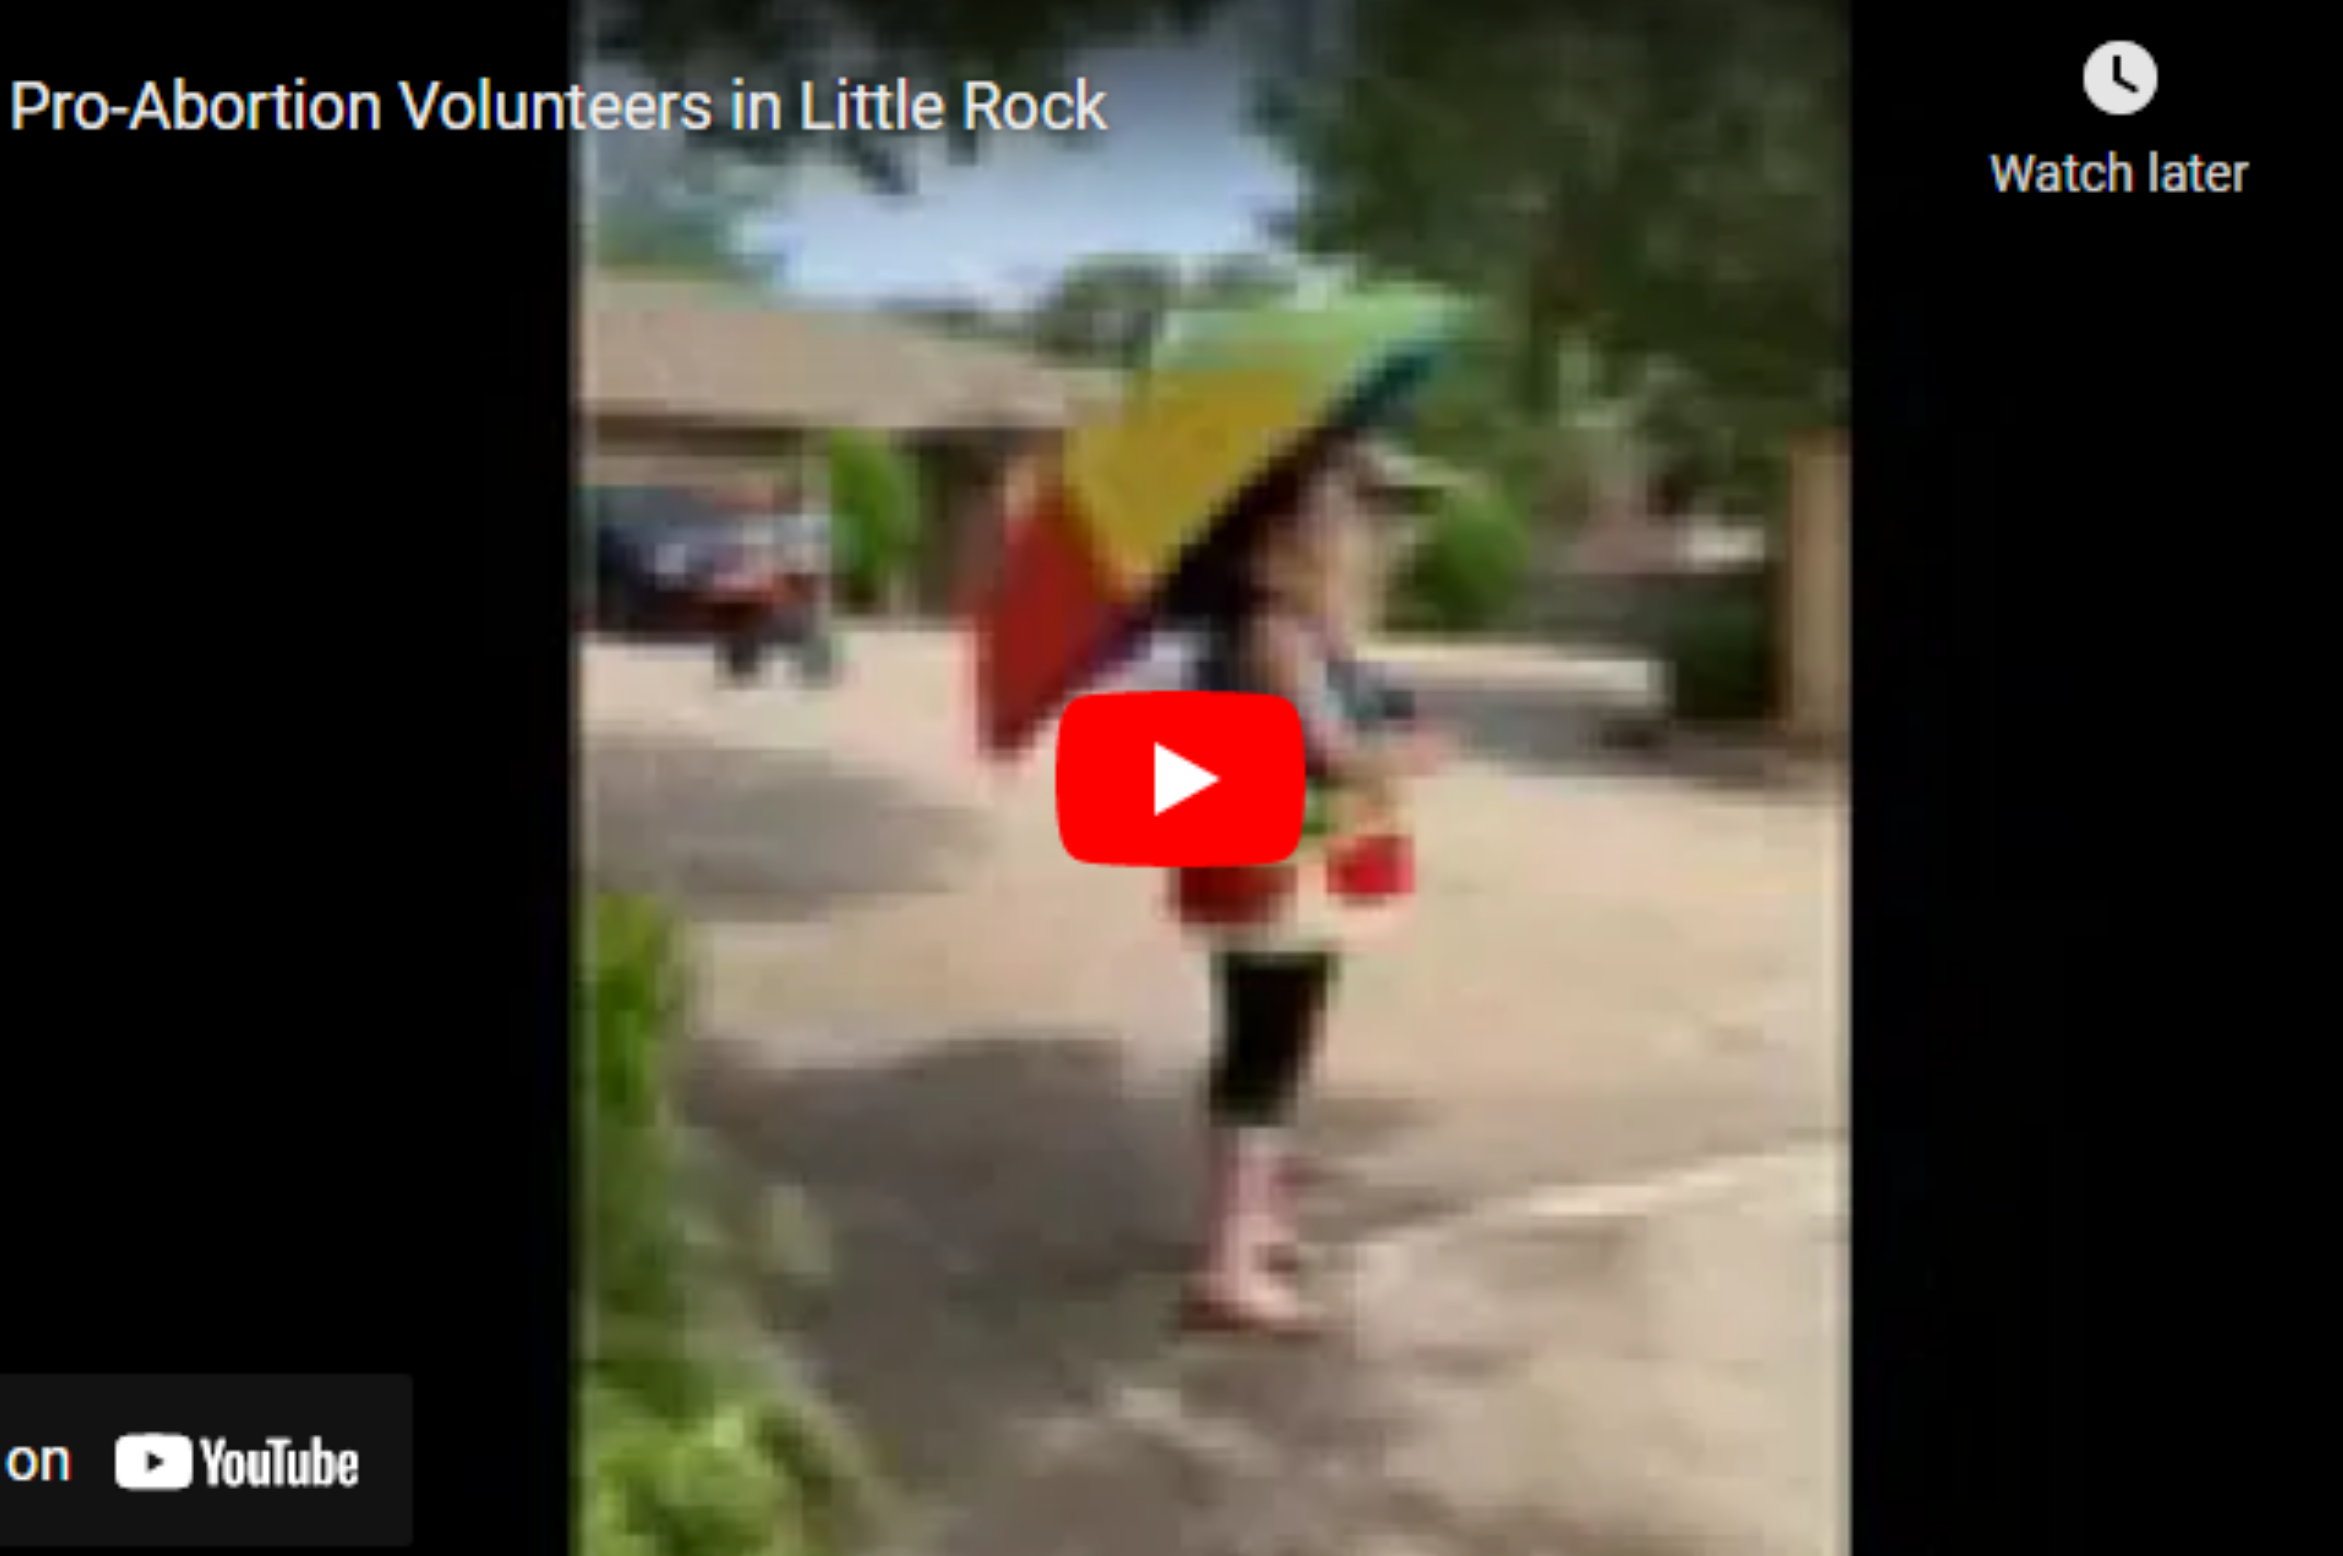 Pro-Abortion Volunteers Play Music, Block Pro-Lifers Outside Surgical Abortion Facility